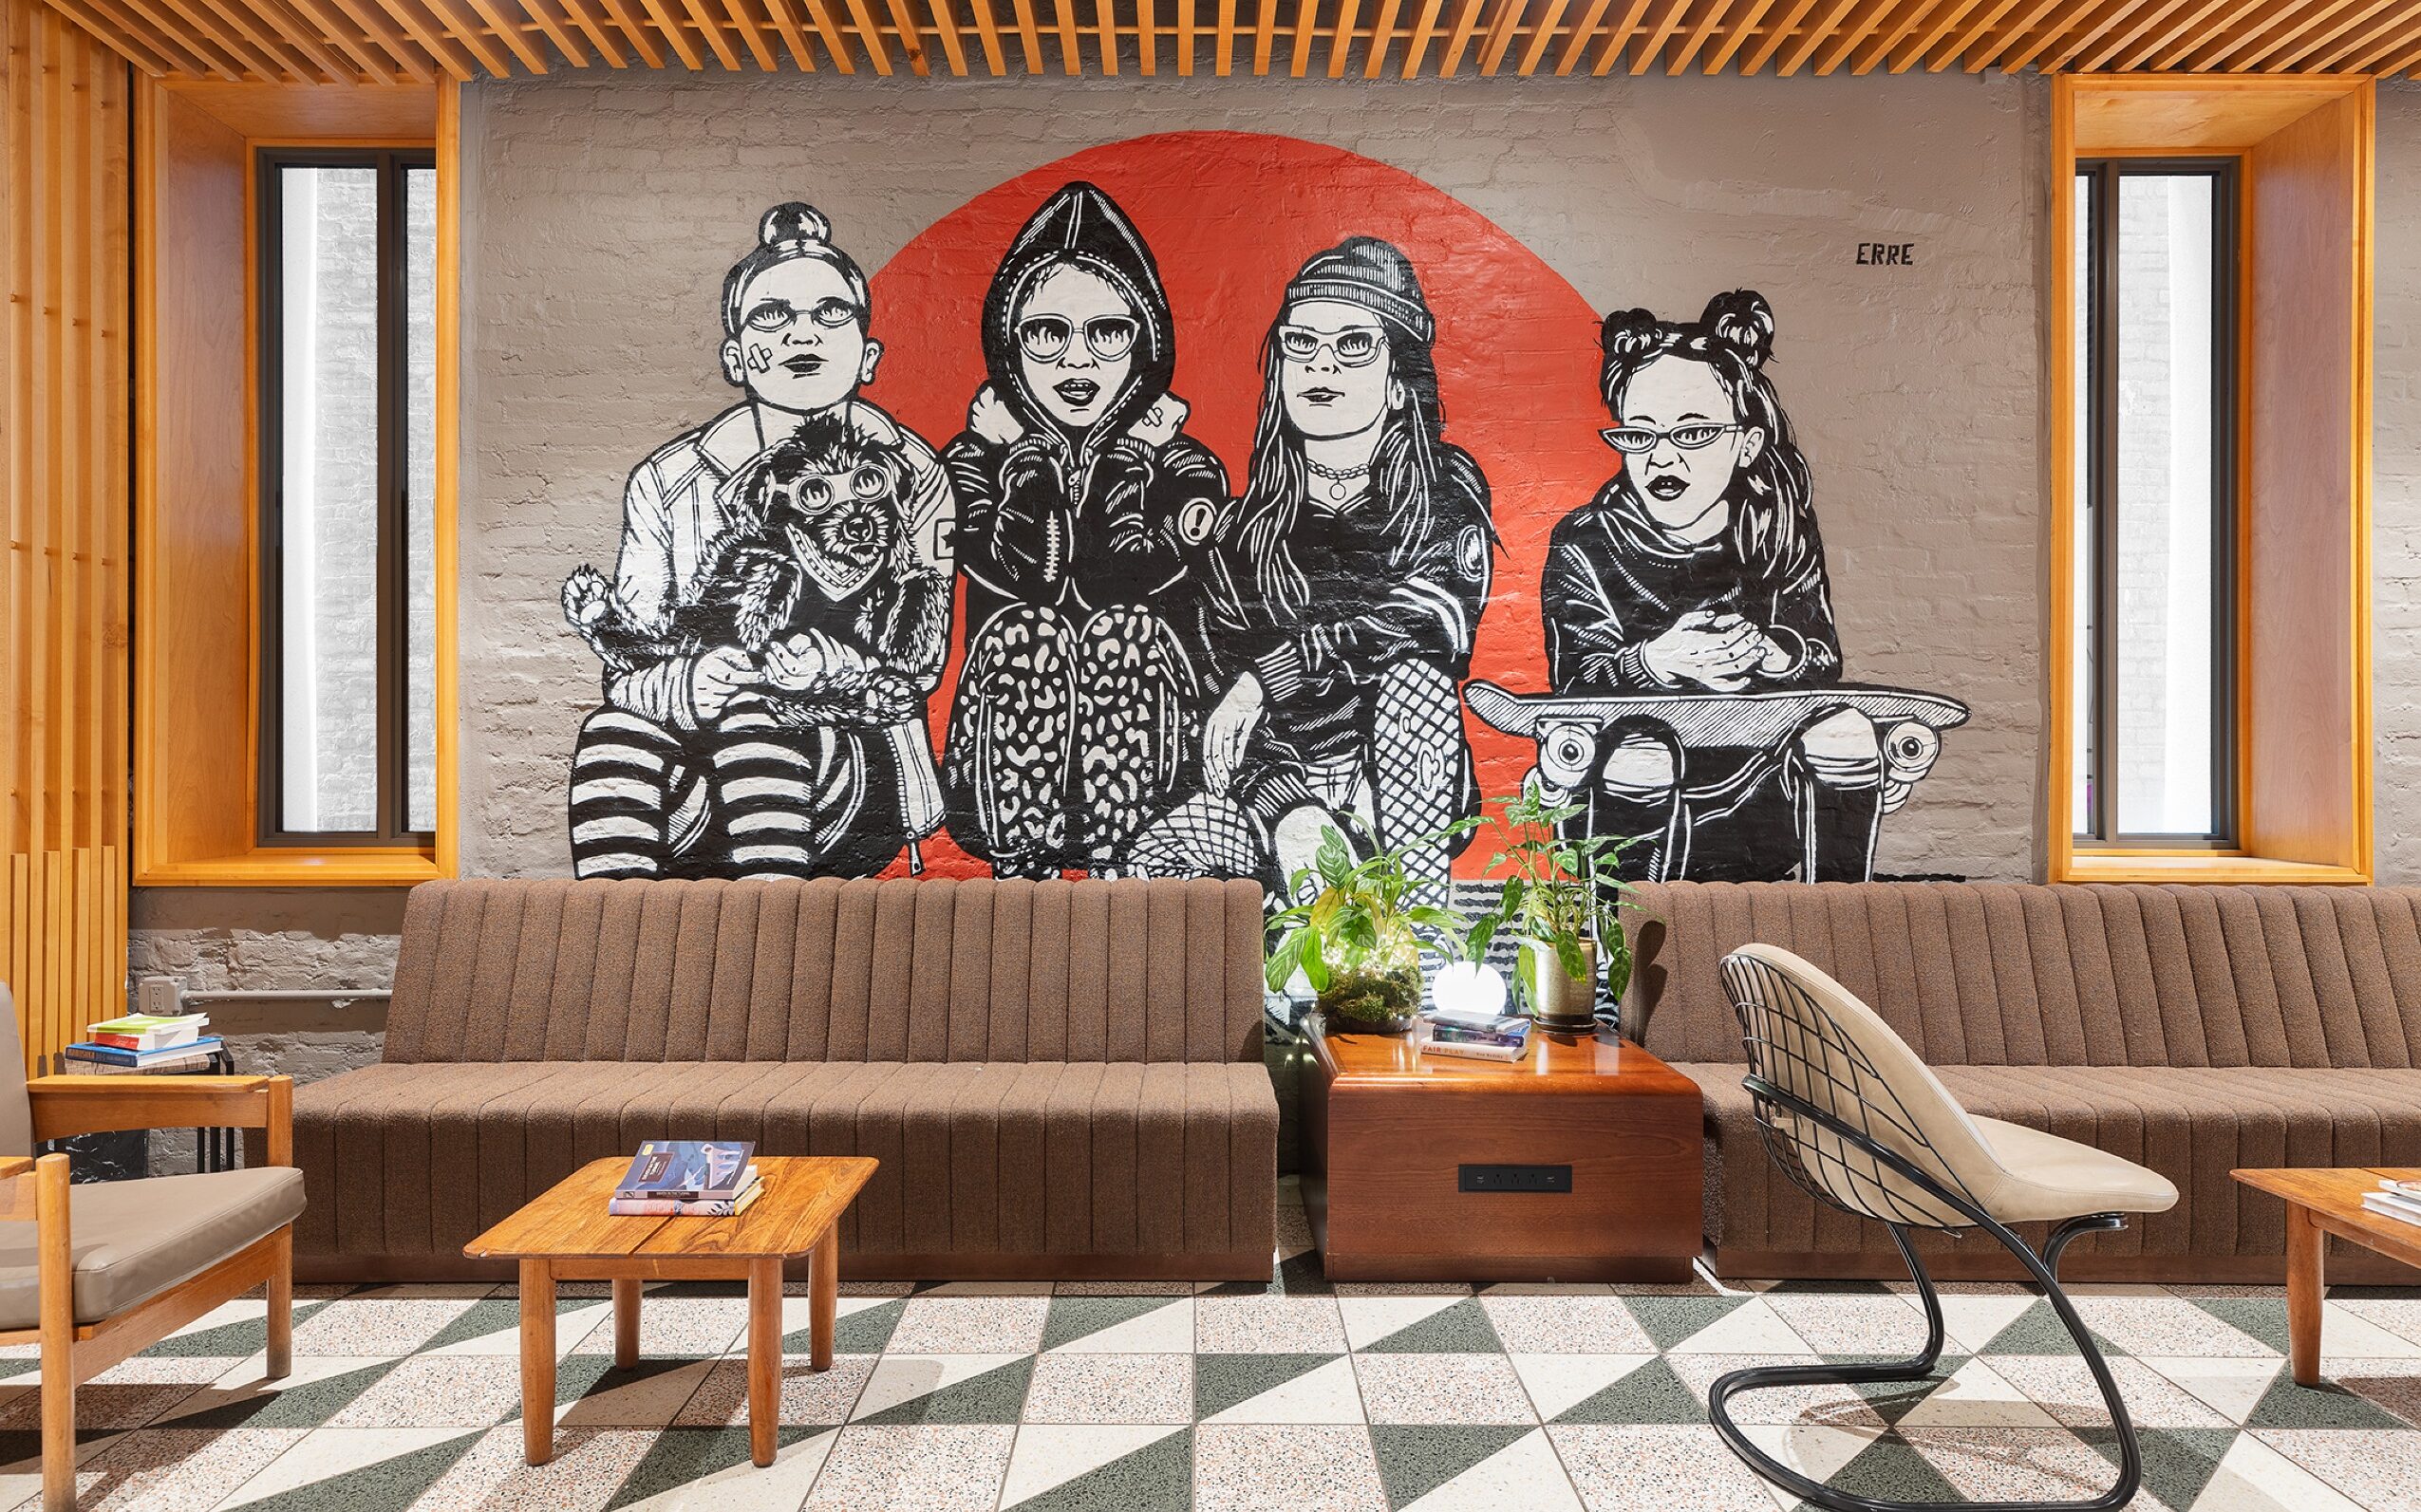 This Urban-Chic Boutique Hotel Is Hidden Down a Cool Graffiti-Lined NYC Alleyway